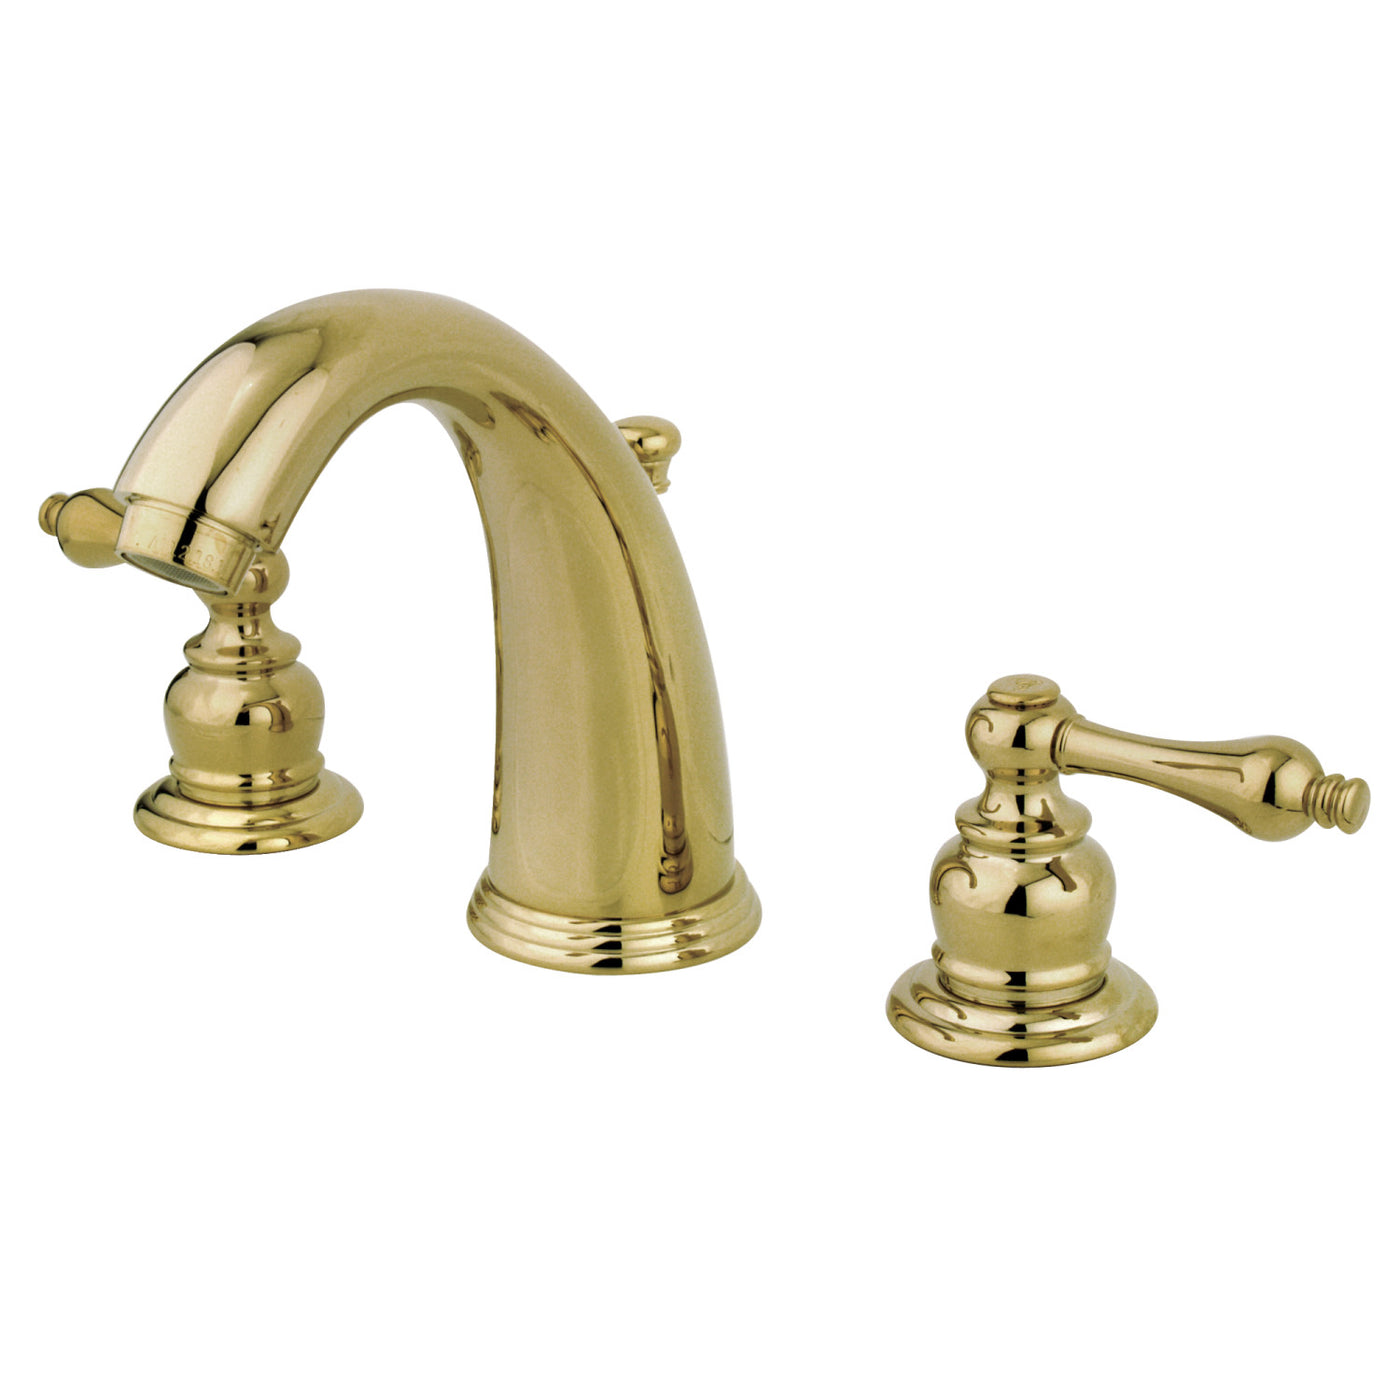 Elements of Design EB982AL Widespread Bathroom Faucet with Retail Pop-Up, Polished Brass